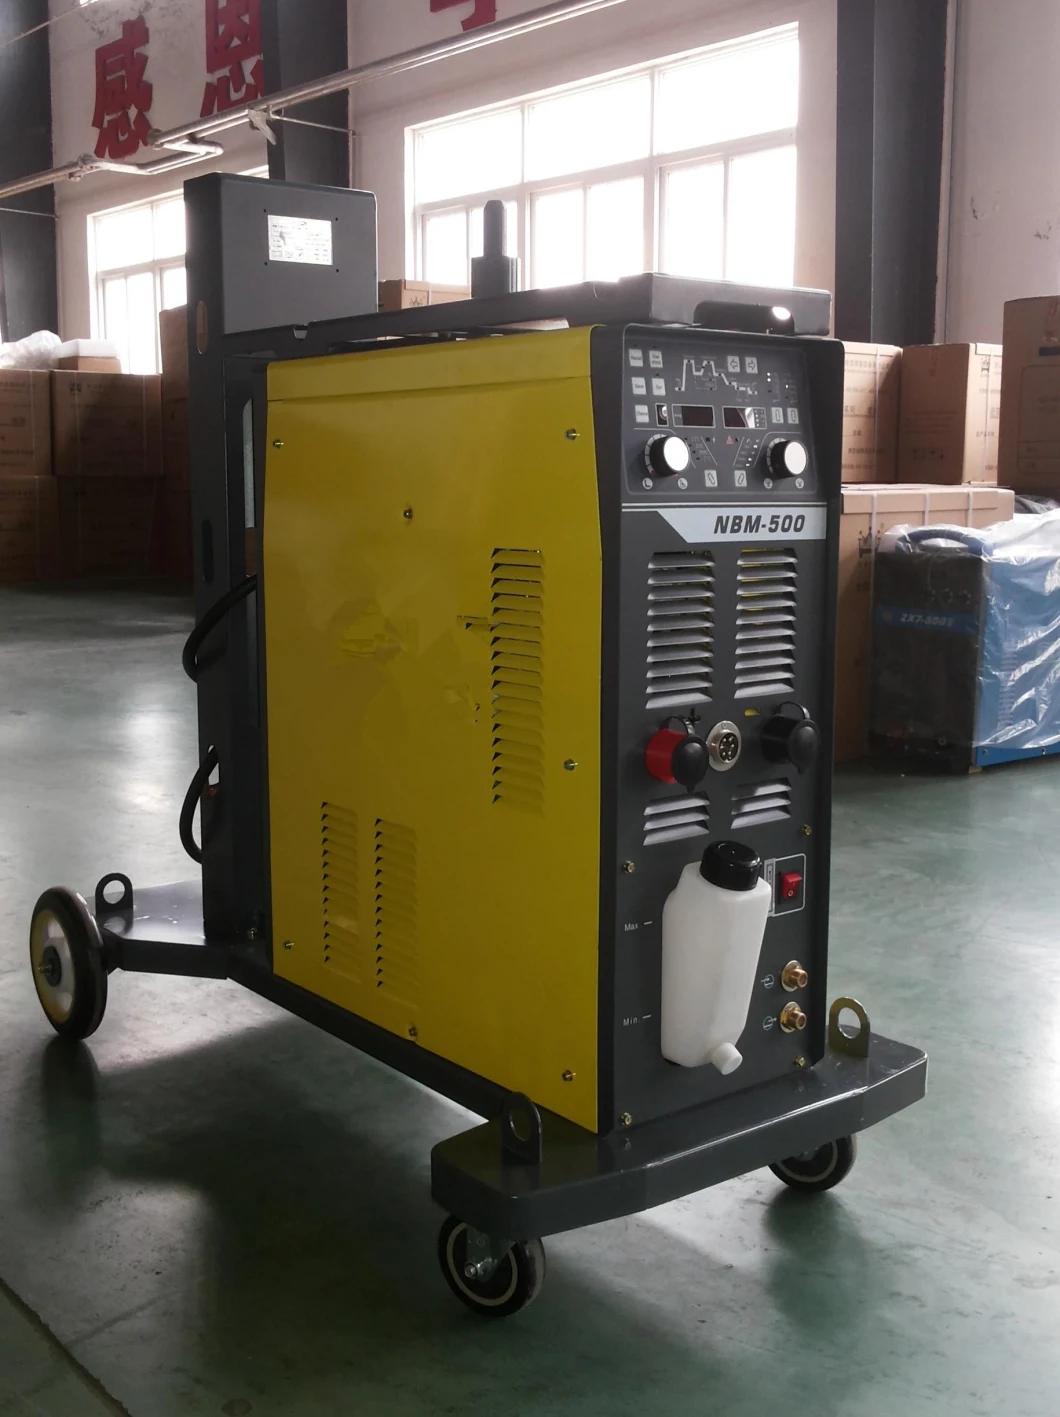 Digital Double Pulse MIG/Mag Welding Machine for Welding Aluminum and Stainless Steel